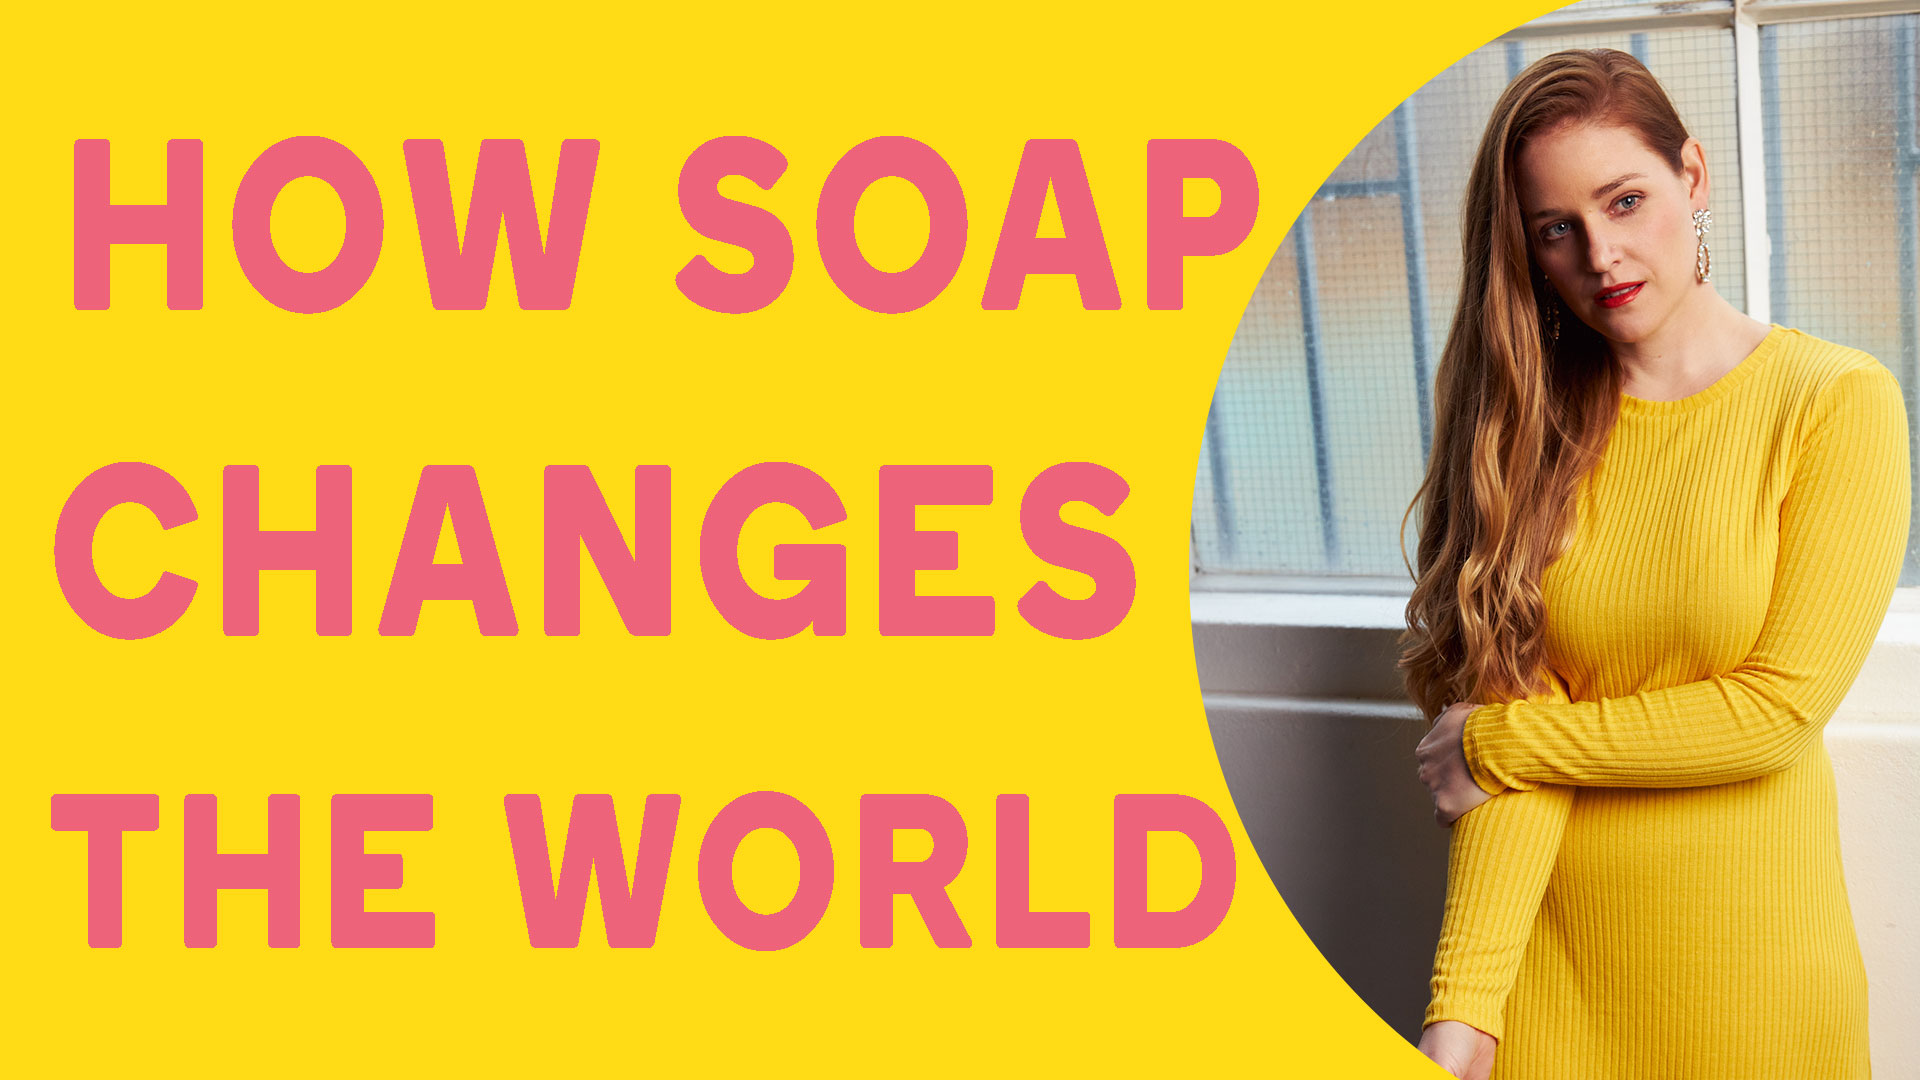 VLOG S02 EP 02 | HOW SOAP CHANGES THE WORLD